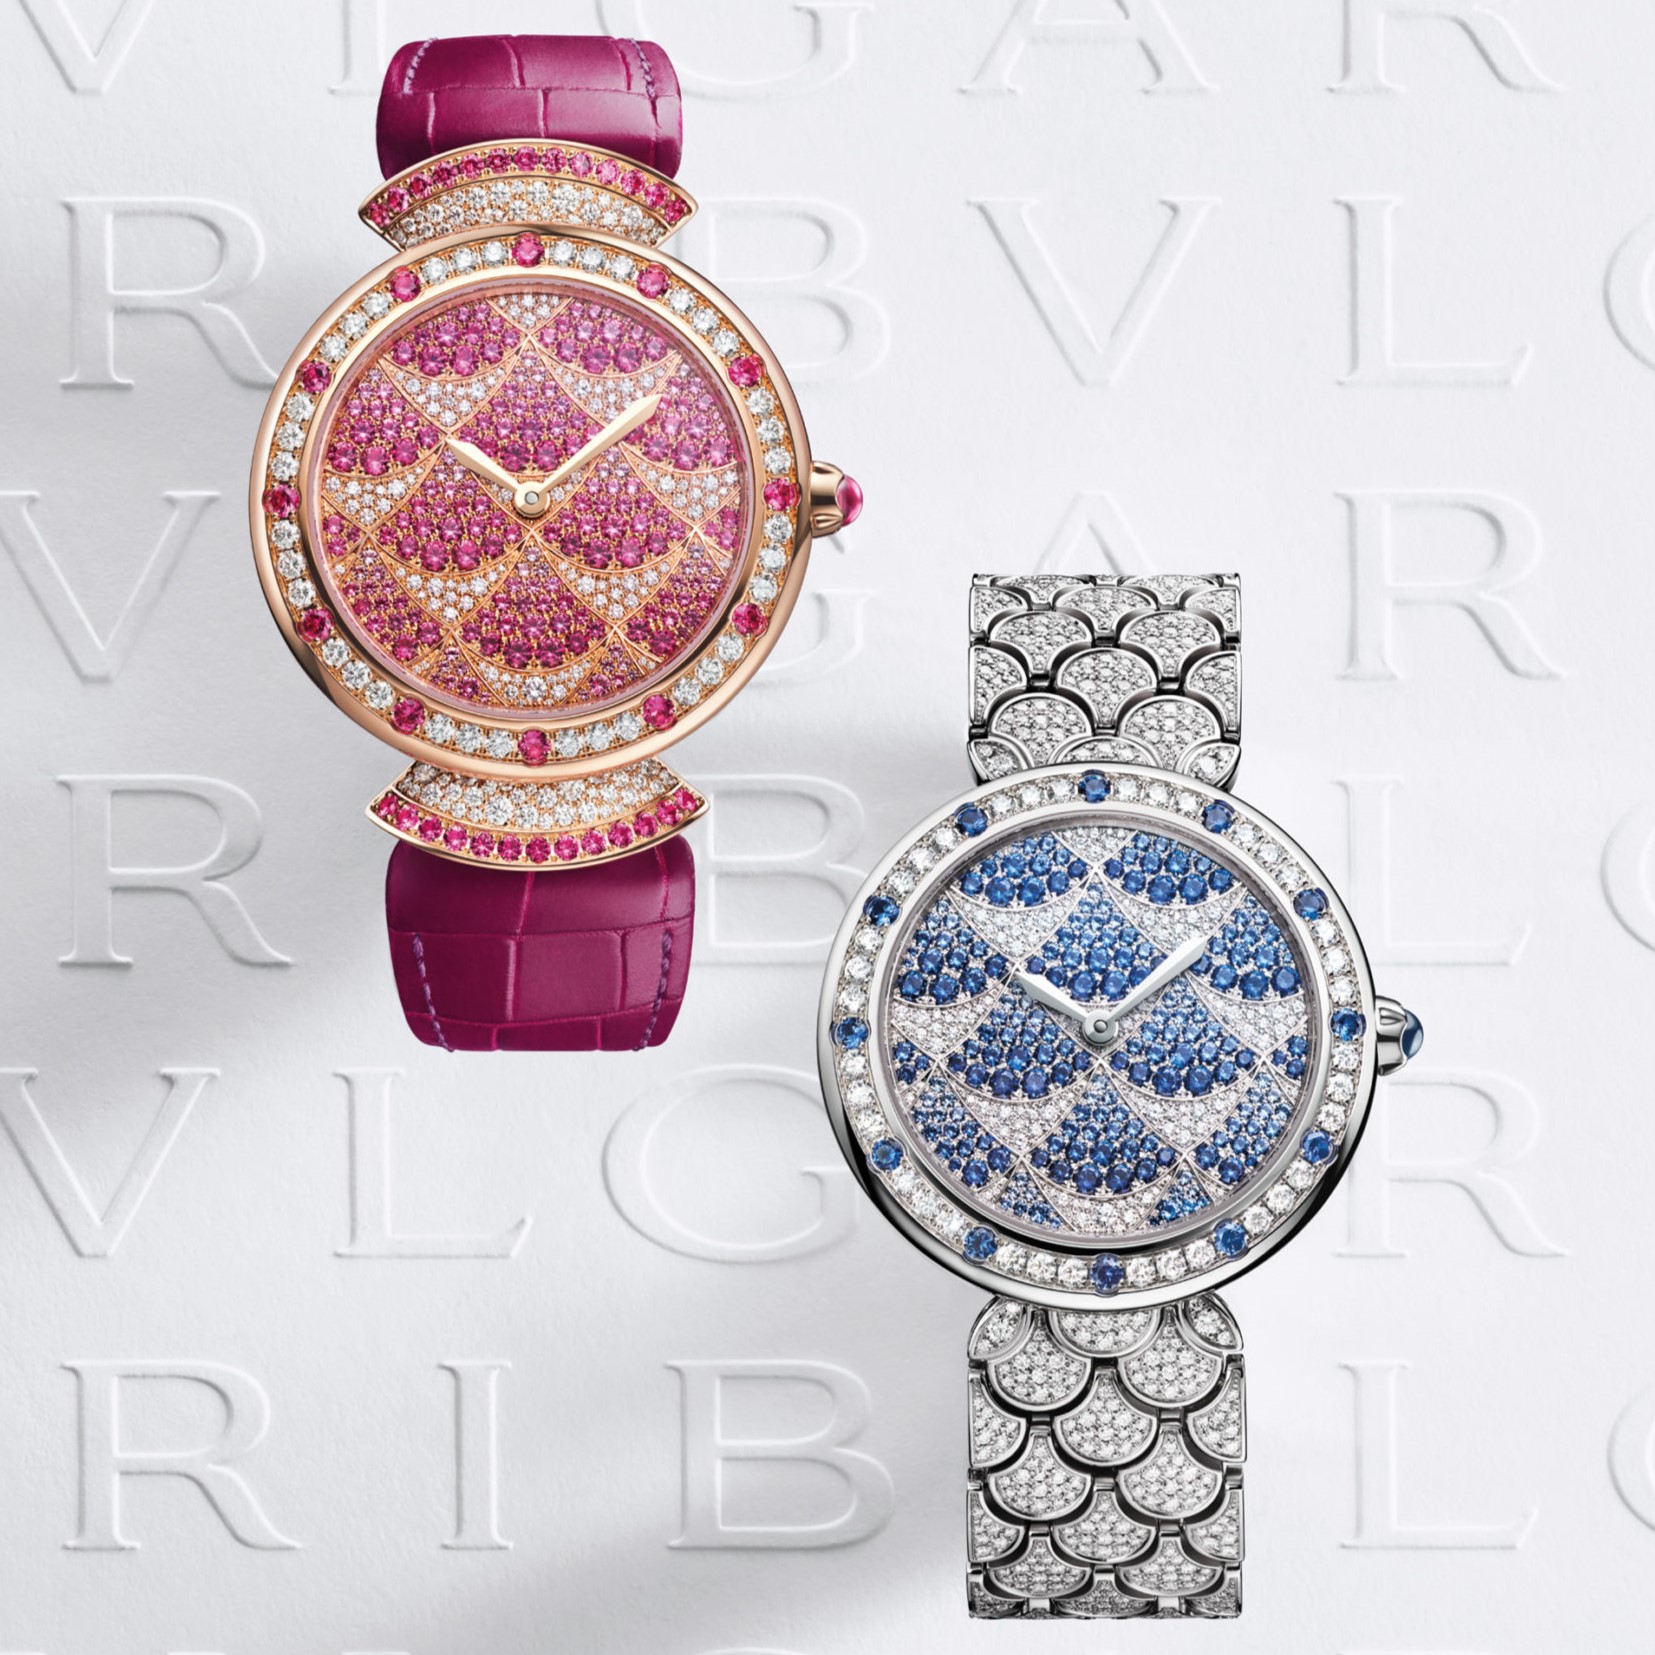 A Festival of Precious Colors: Bulgari Introduces High Jewelry Watches at LVMH  Watch Week